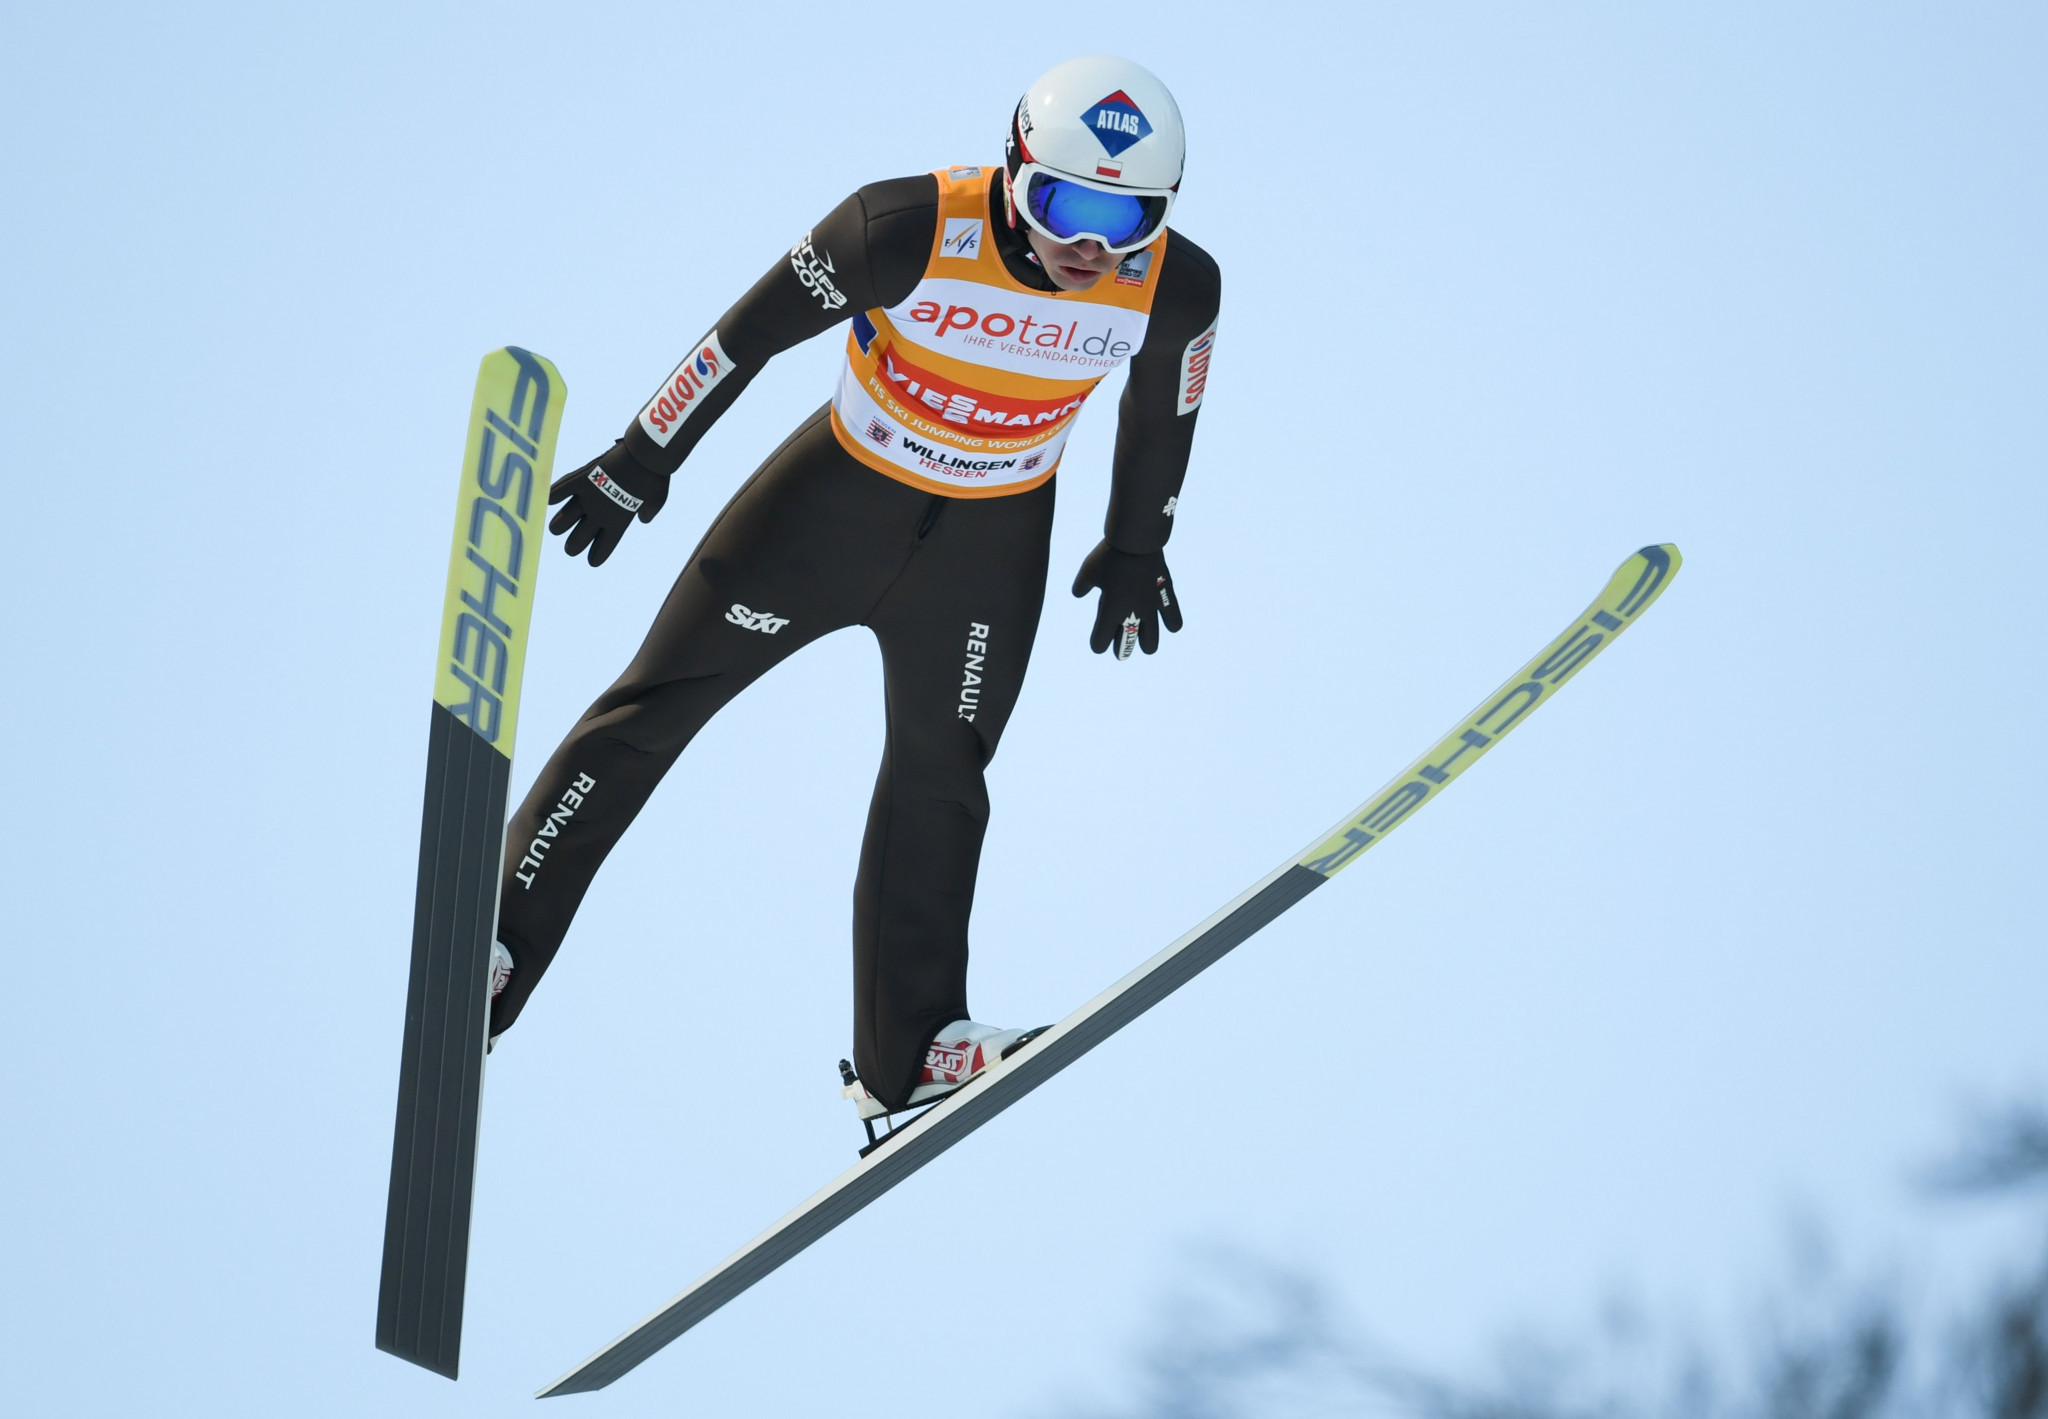 Kamil Stoch helped Poland win the team competition at the FIS Ski Jumping World Cup in Willingen ©Getty Images